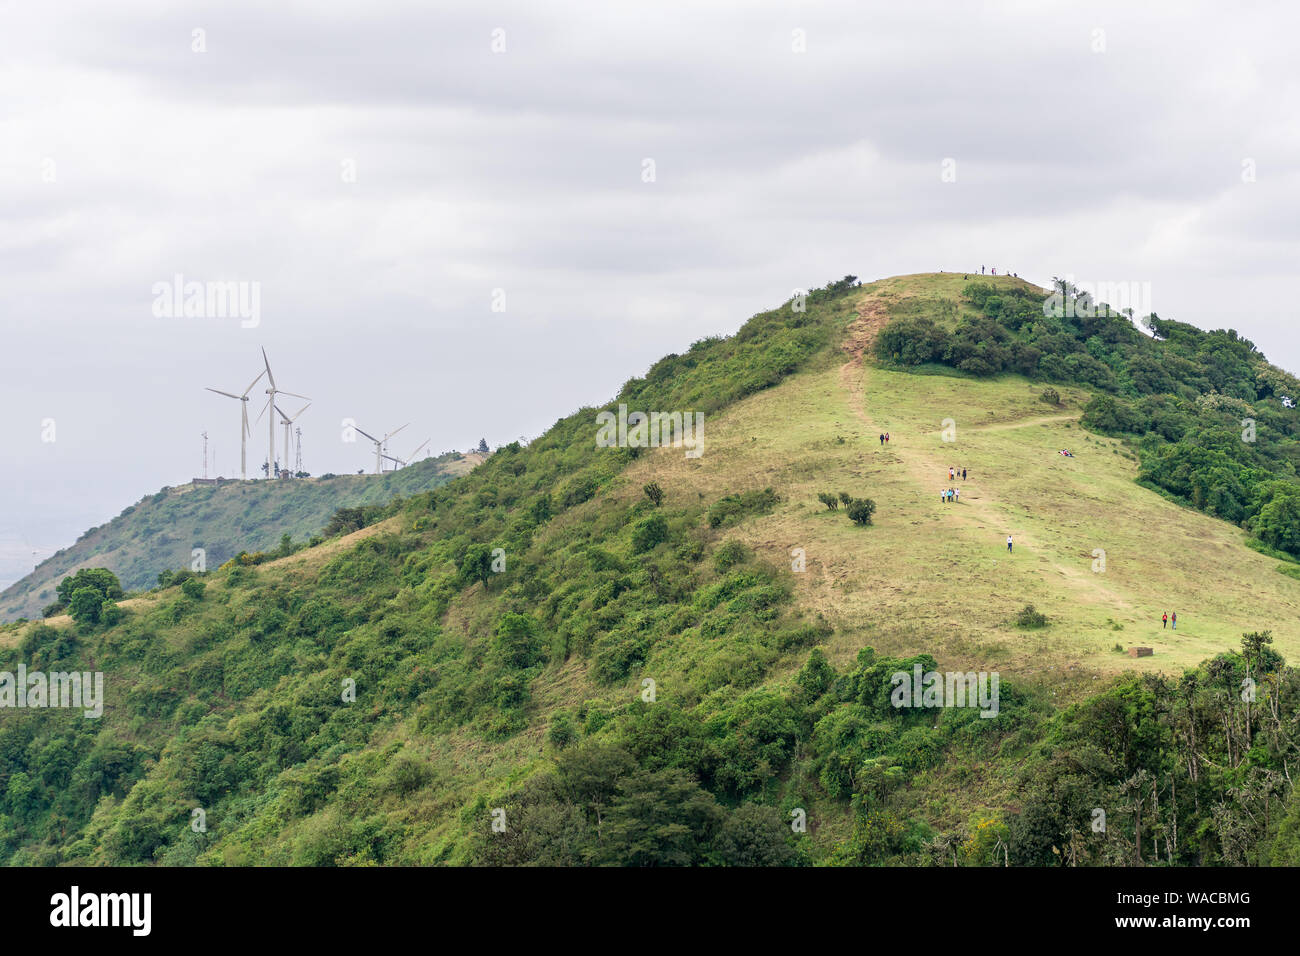 Ngong Hills Nature Reserve with hiking trails and wind power plant turbines in background, Kenya Stock Photo